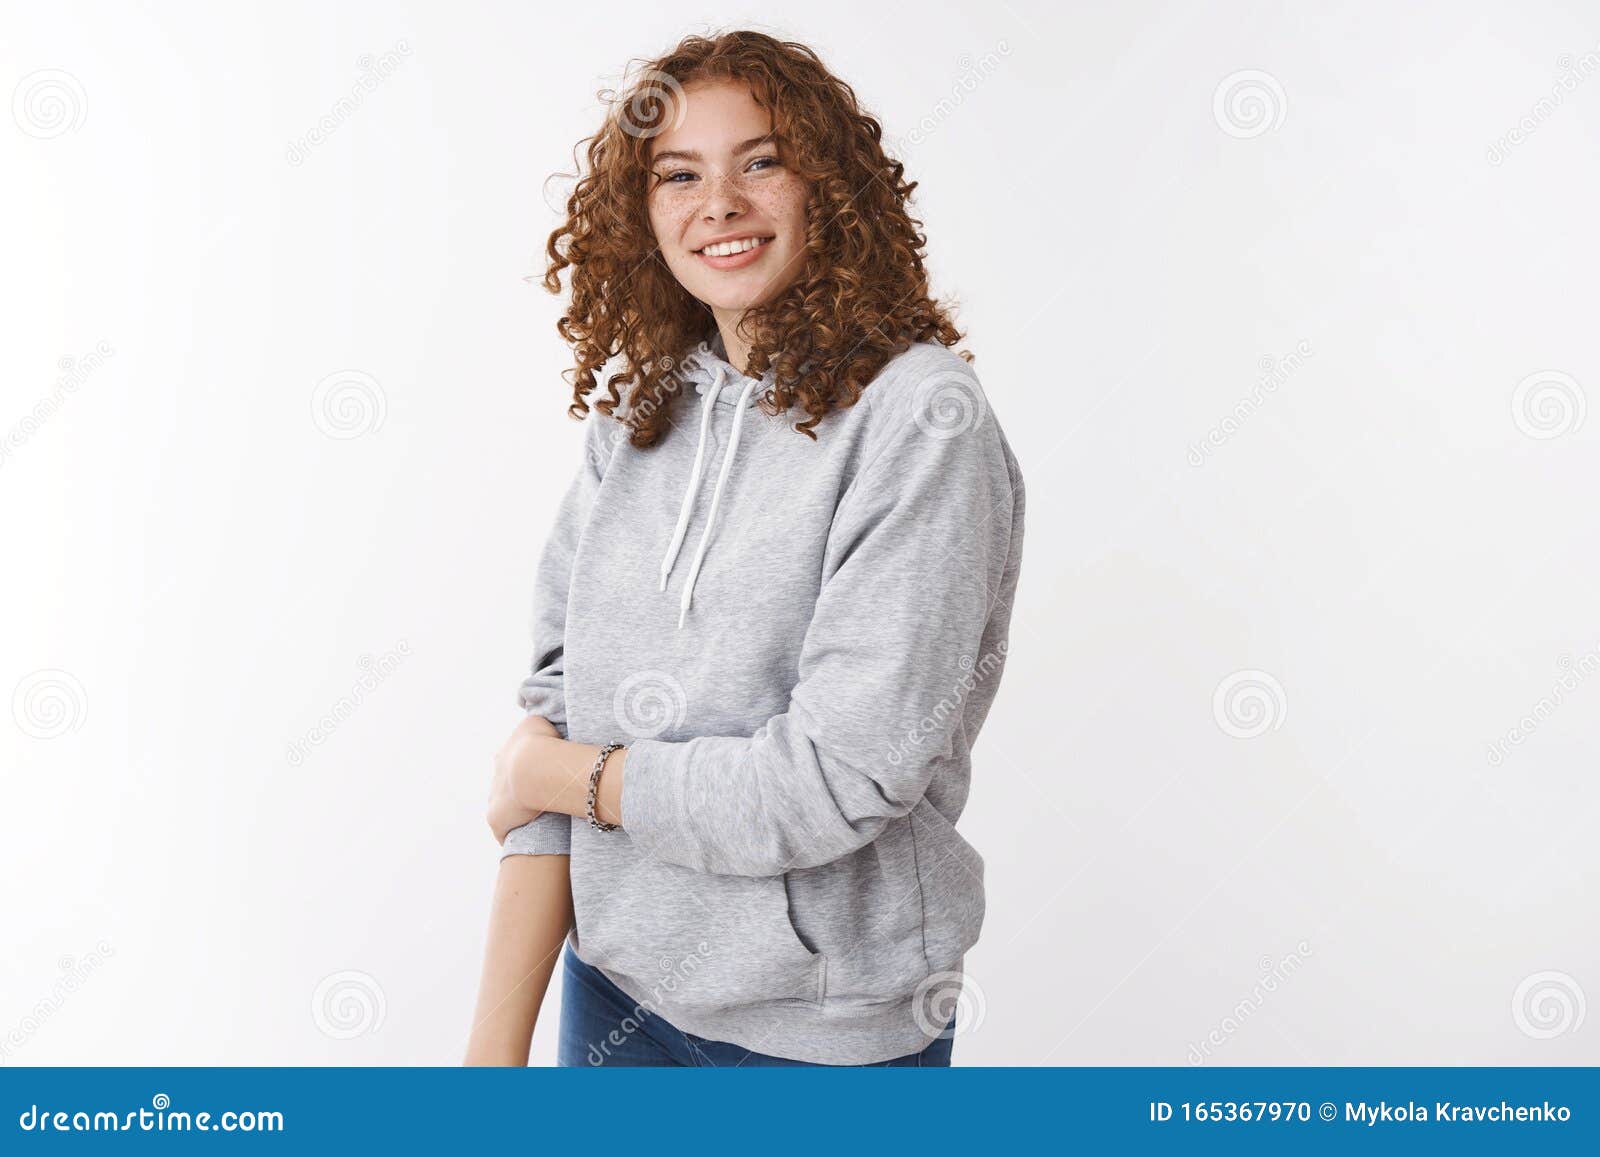 cute insecure young redhead teenage girl with freckles curly hair wearing grey hoodie smiling touch arm unconfident